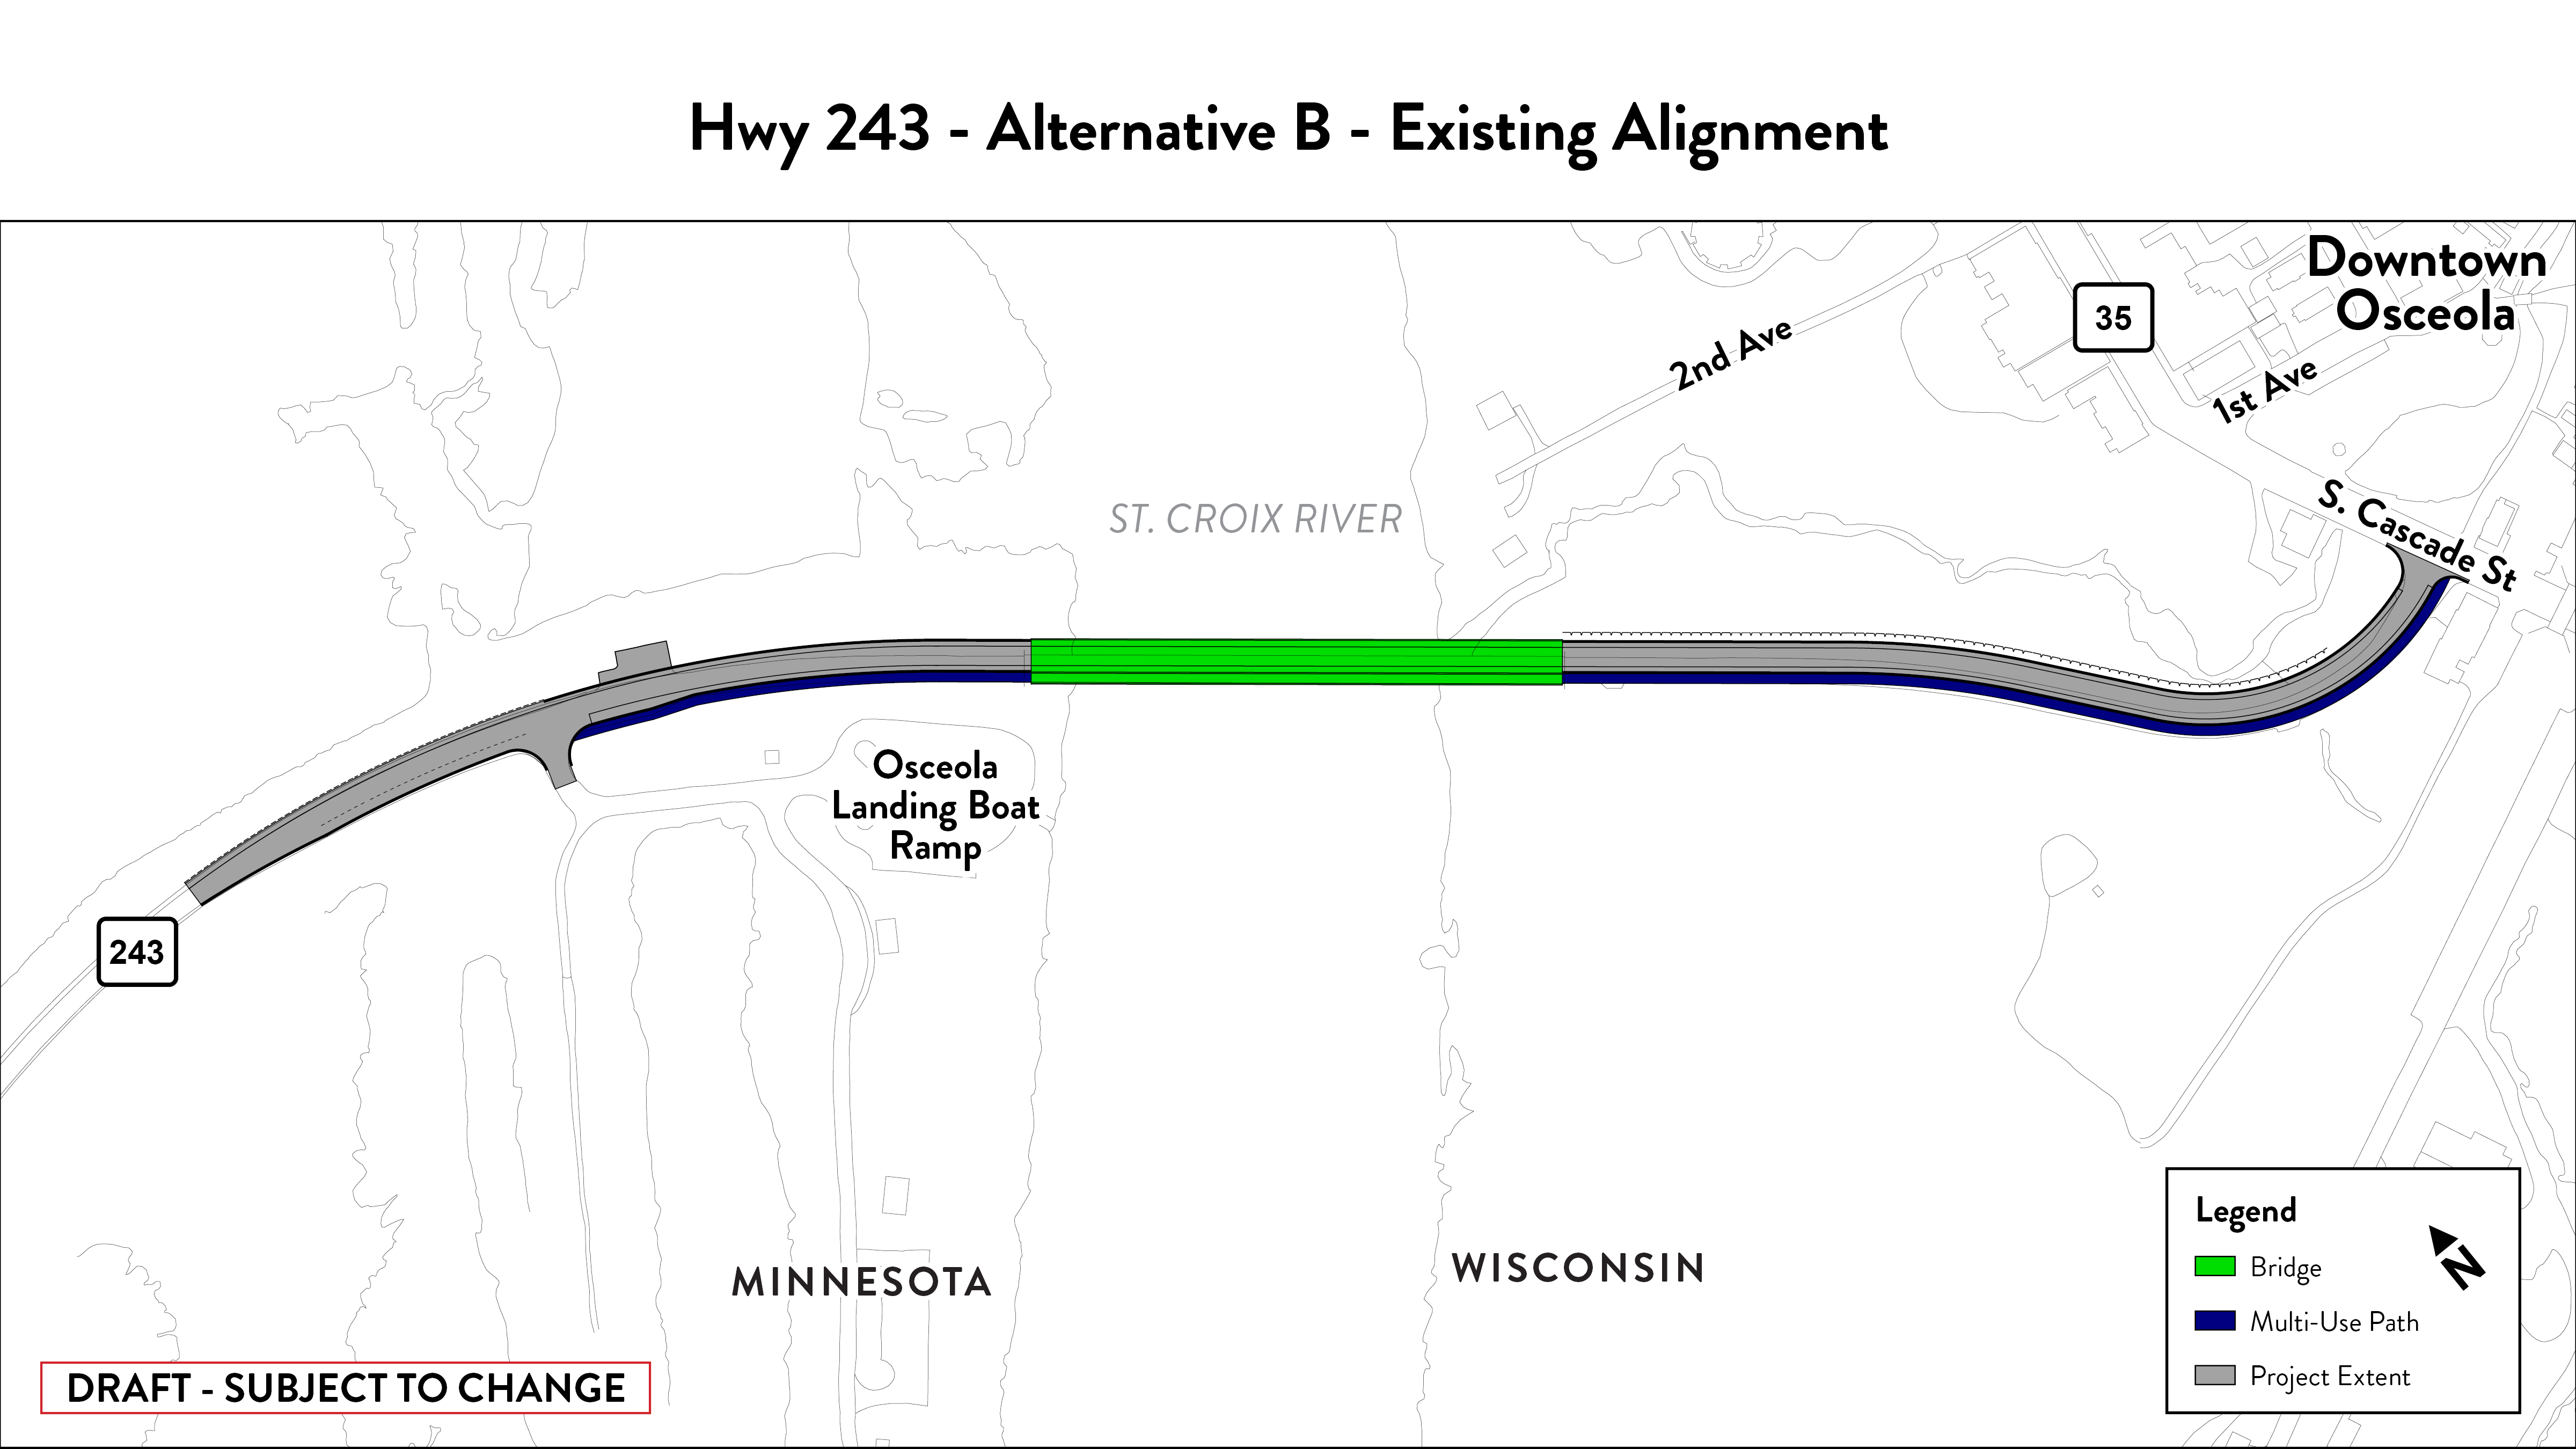 Shows alternative B, including construction limits, proposed and existing road, and path for people walking or biking.